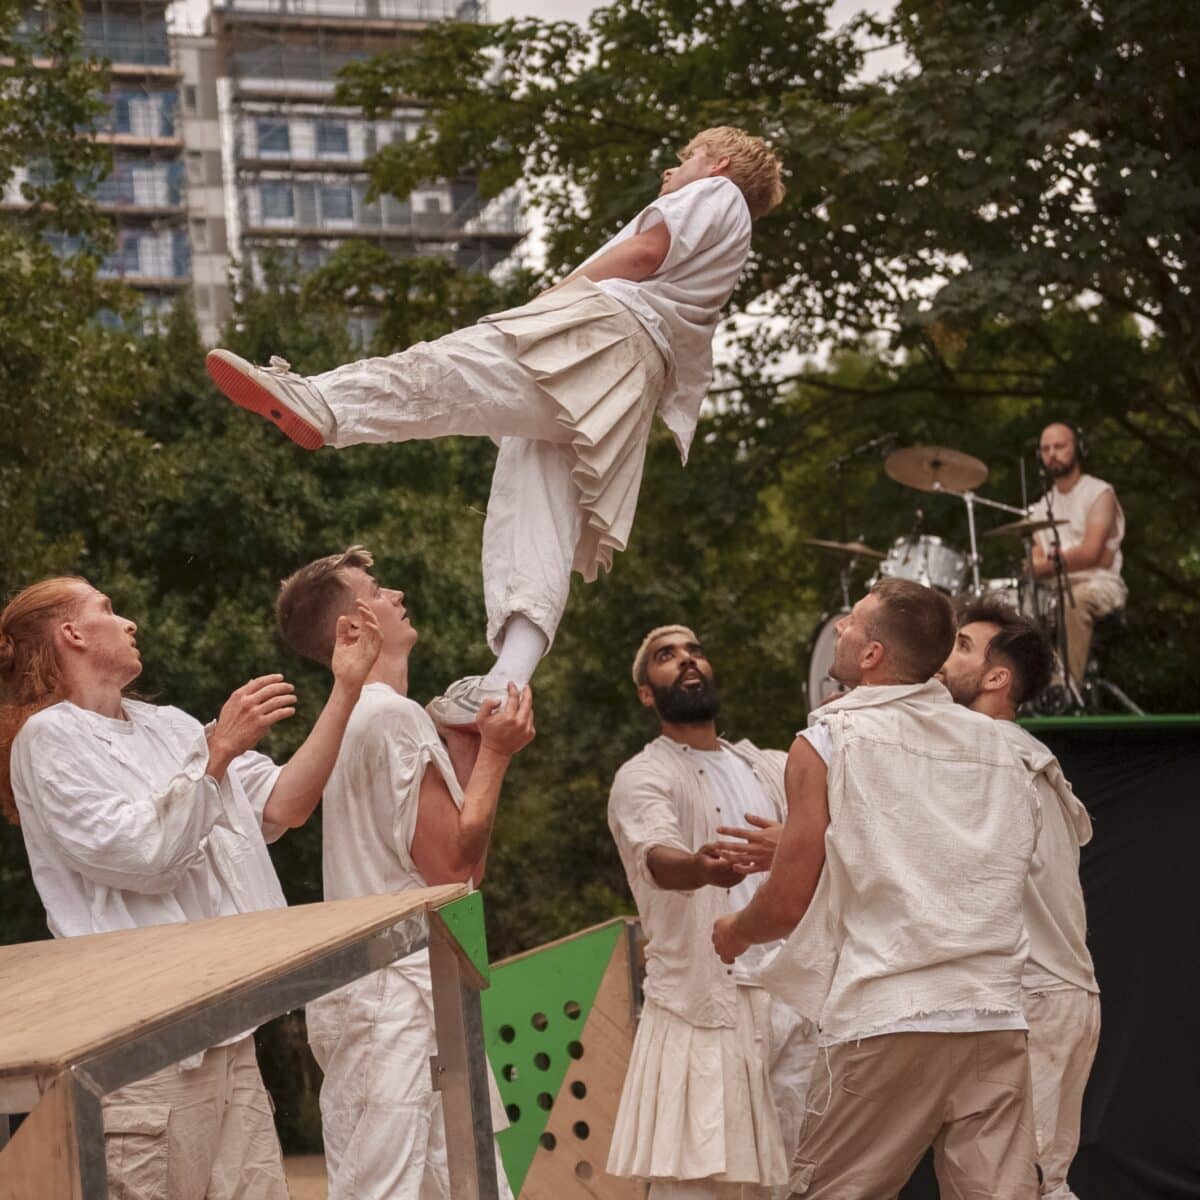 Five dancers dressed in neutral clothing throw and catch another dancer in an outdoor background.